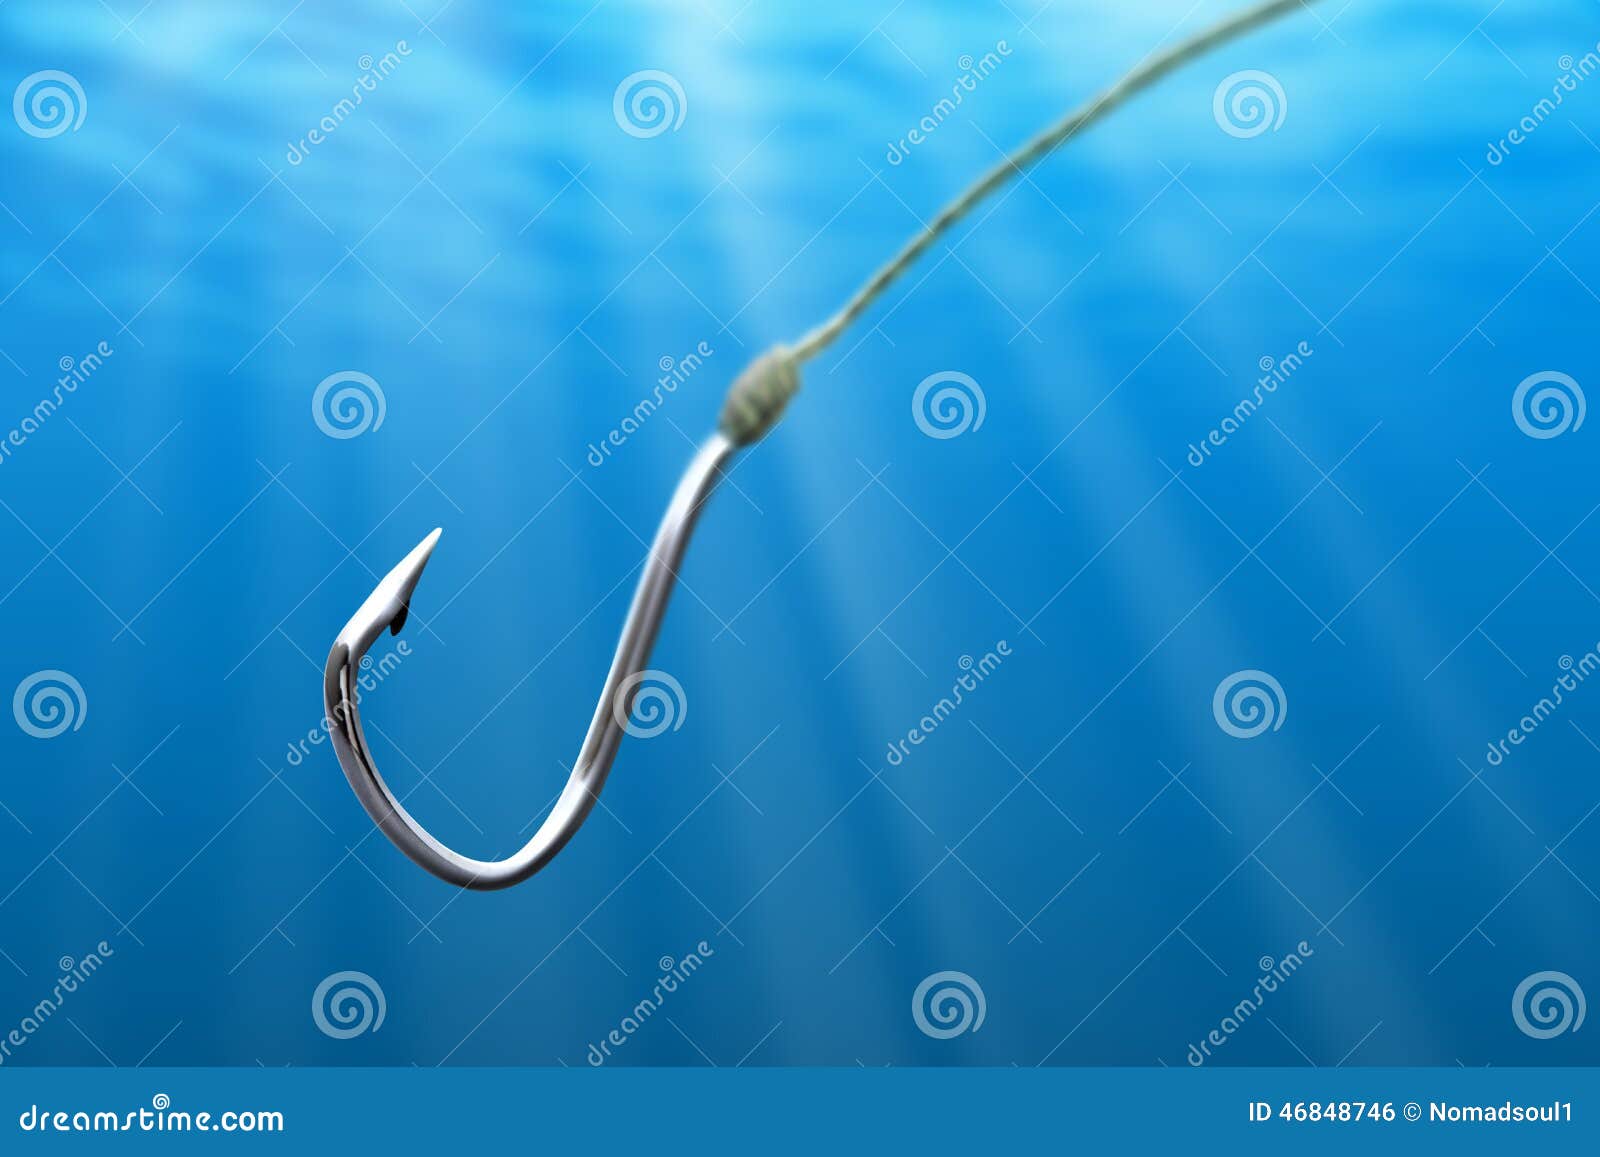 Fishing hook in the sea stock photo. Image of background - 46848746